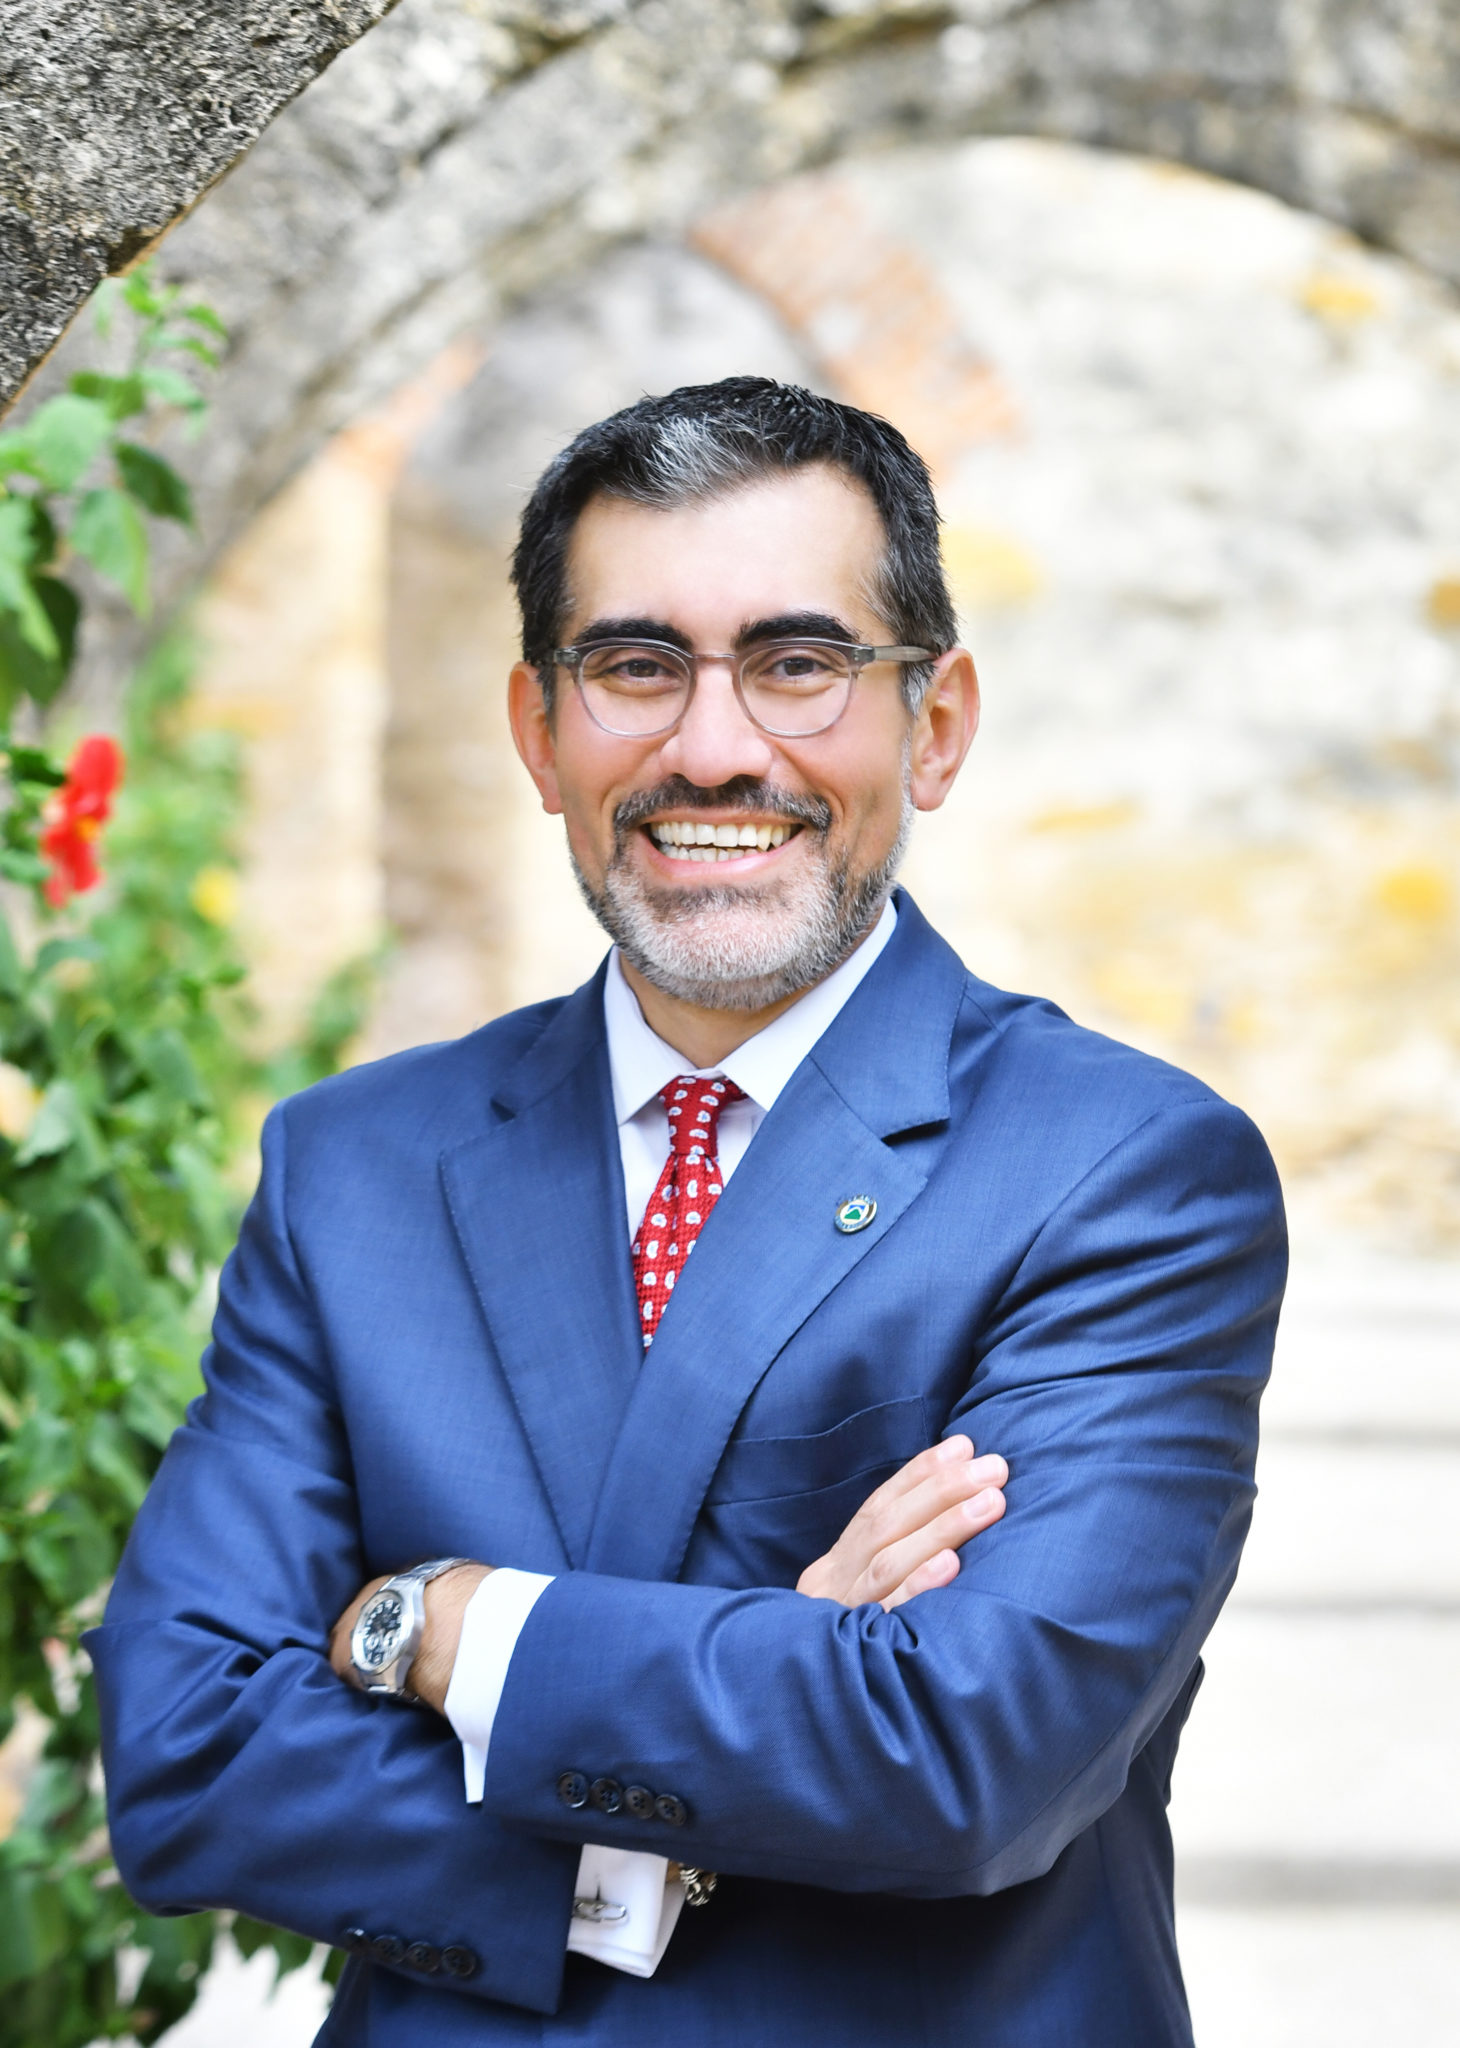 Dr. Mike Flores will deliver the 2022 Dallas Herring Lecture